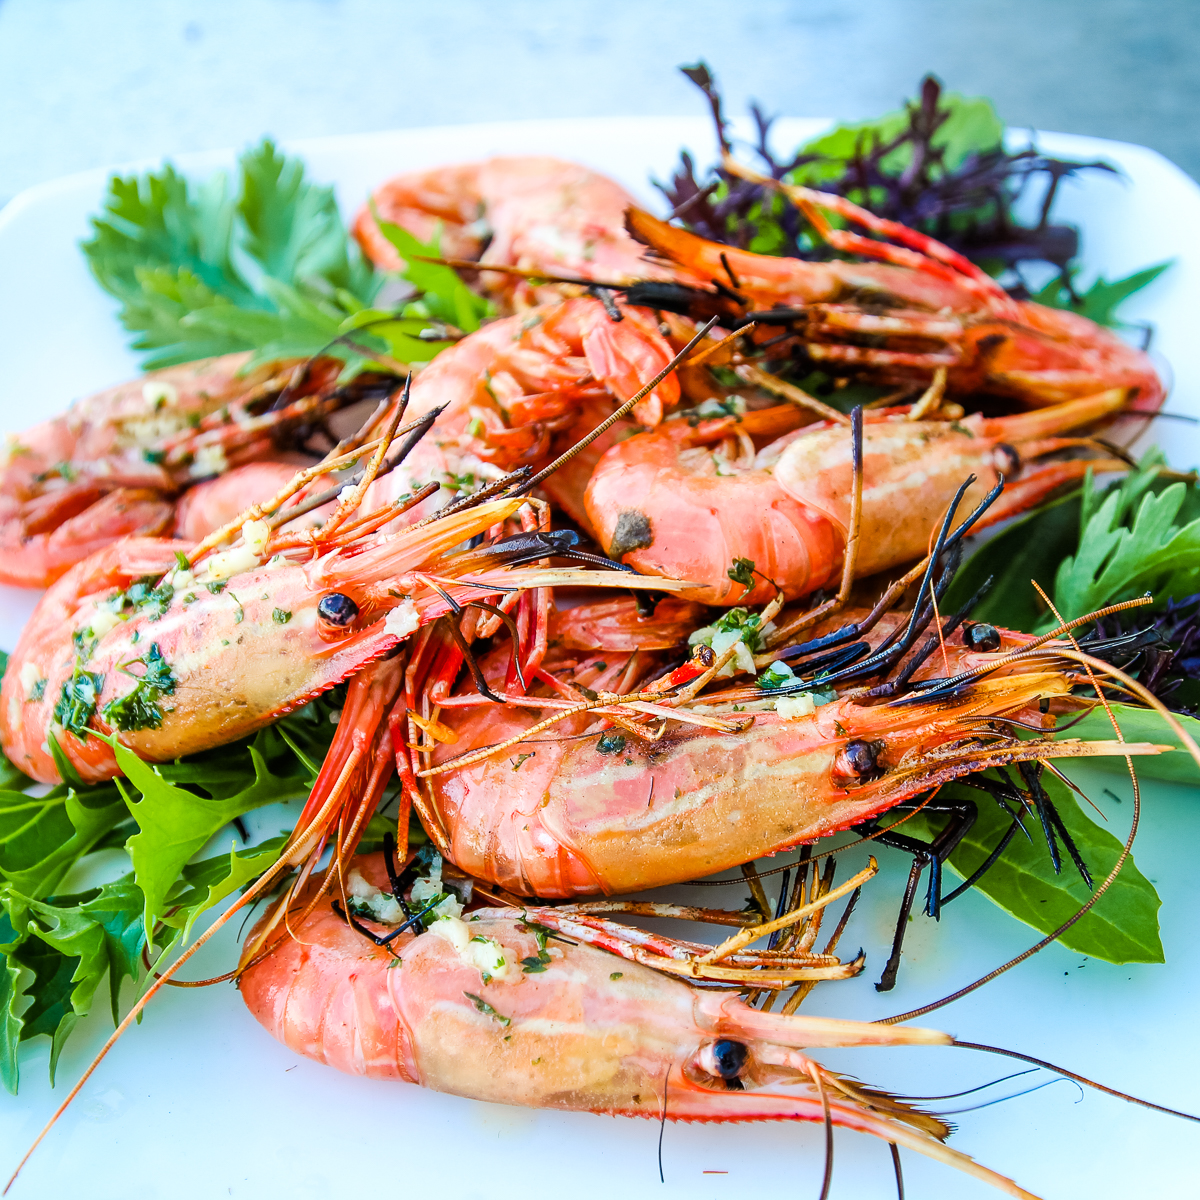 Bright orange grilled spot prawns on a bed of lettuce atop a white plate.